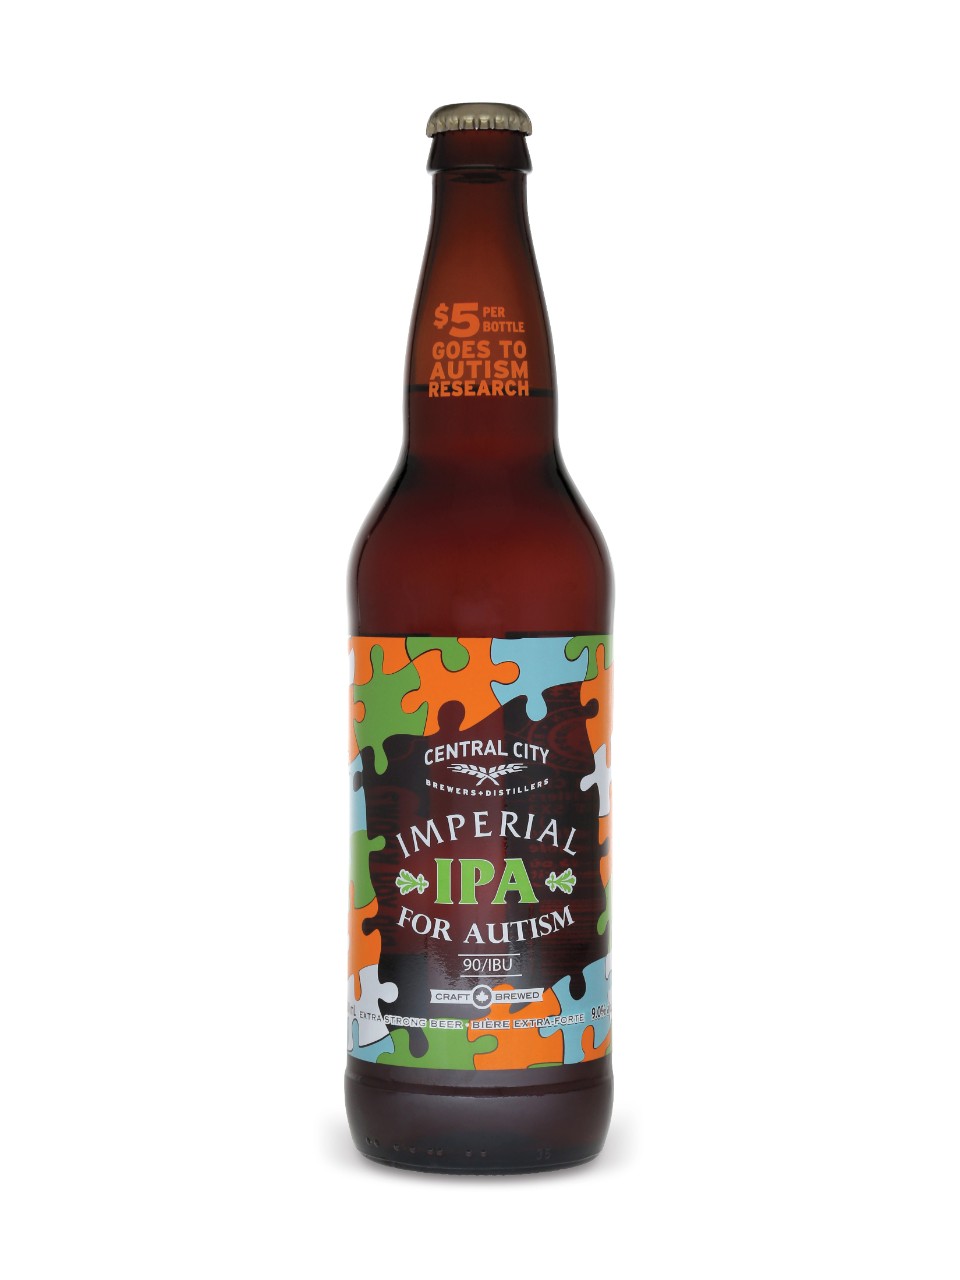 Central City Imperial IPA for Autism